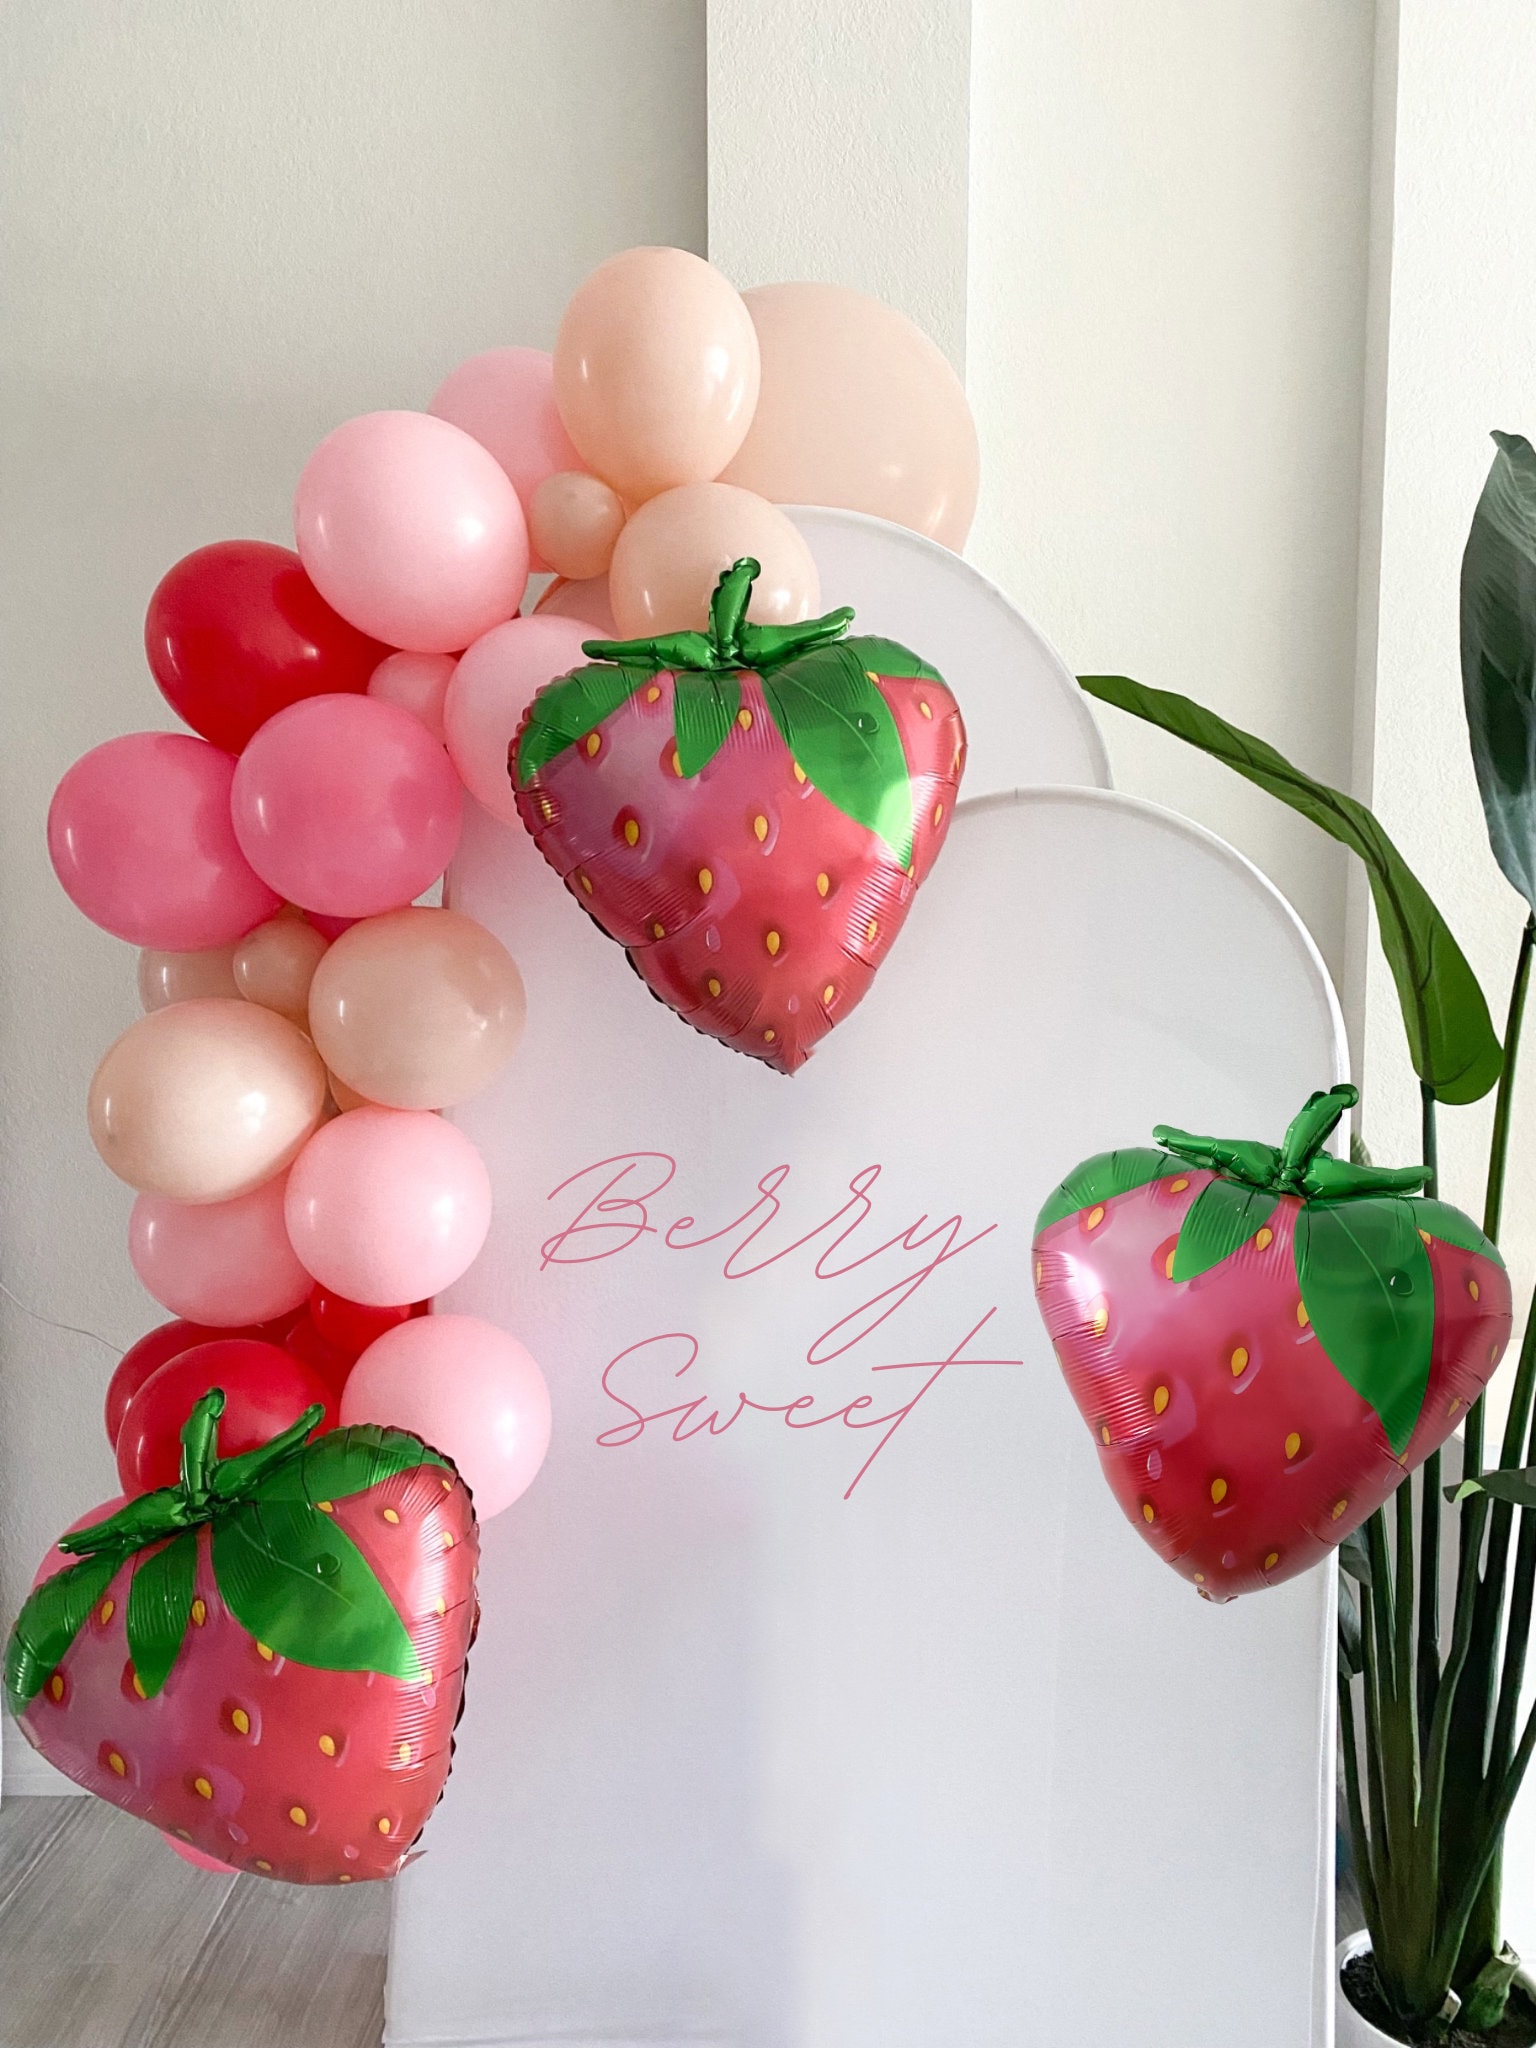 Strawberry 1st Birthday Decorations - Berry First Birthday Banner,  Strawberry Balloon Garland Kit, Foil Balloons, Summer Fruit Strawberry  Sweet One